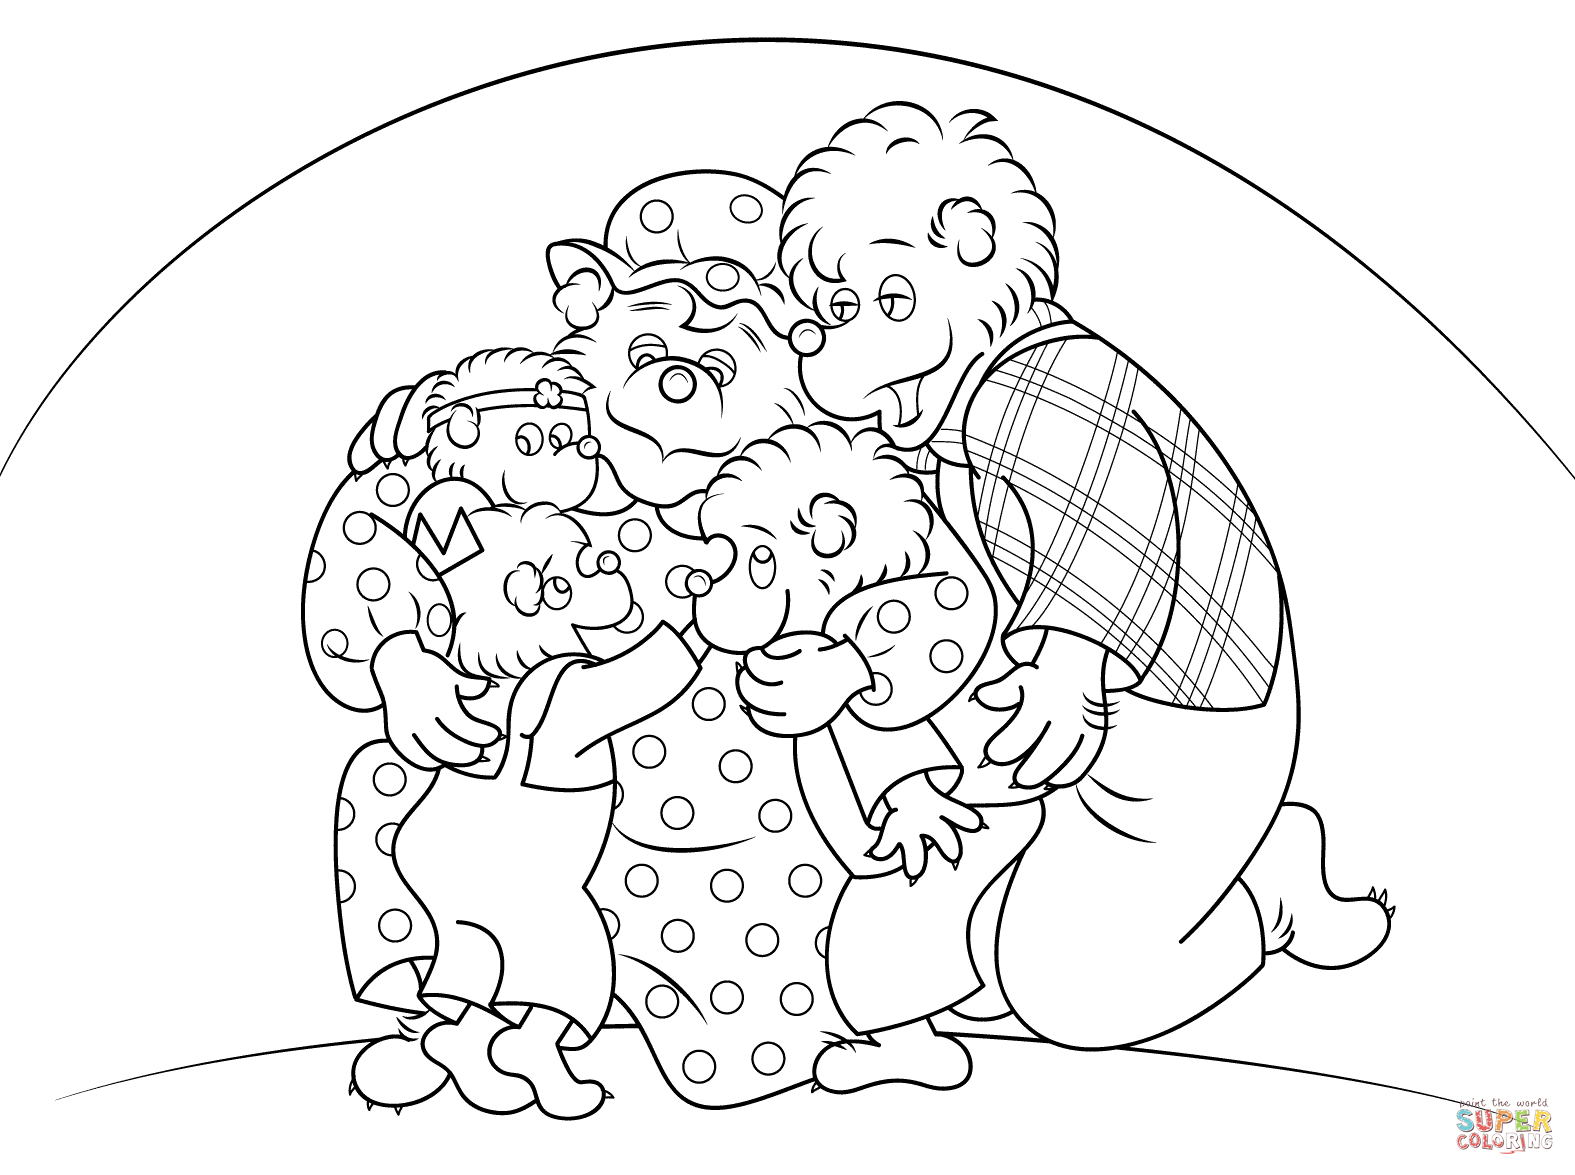 Berenstain Bears coloring pages | Free Coloring Pages